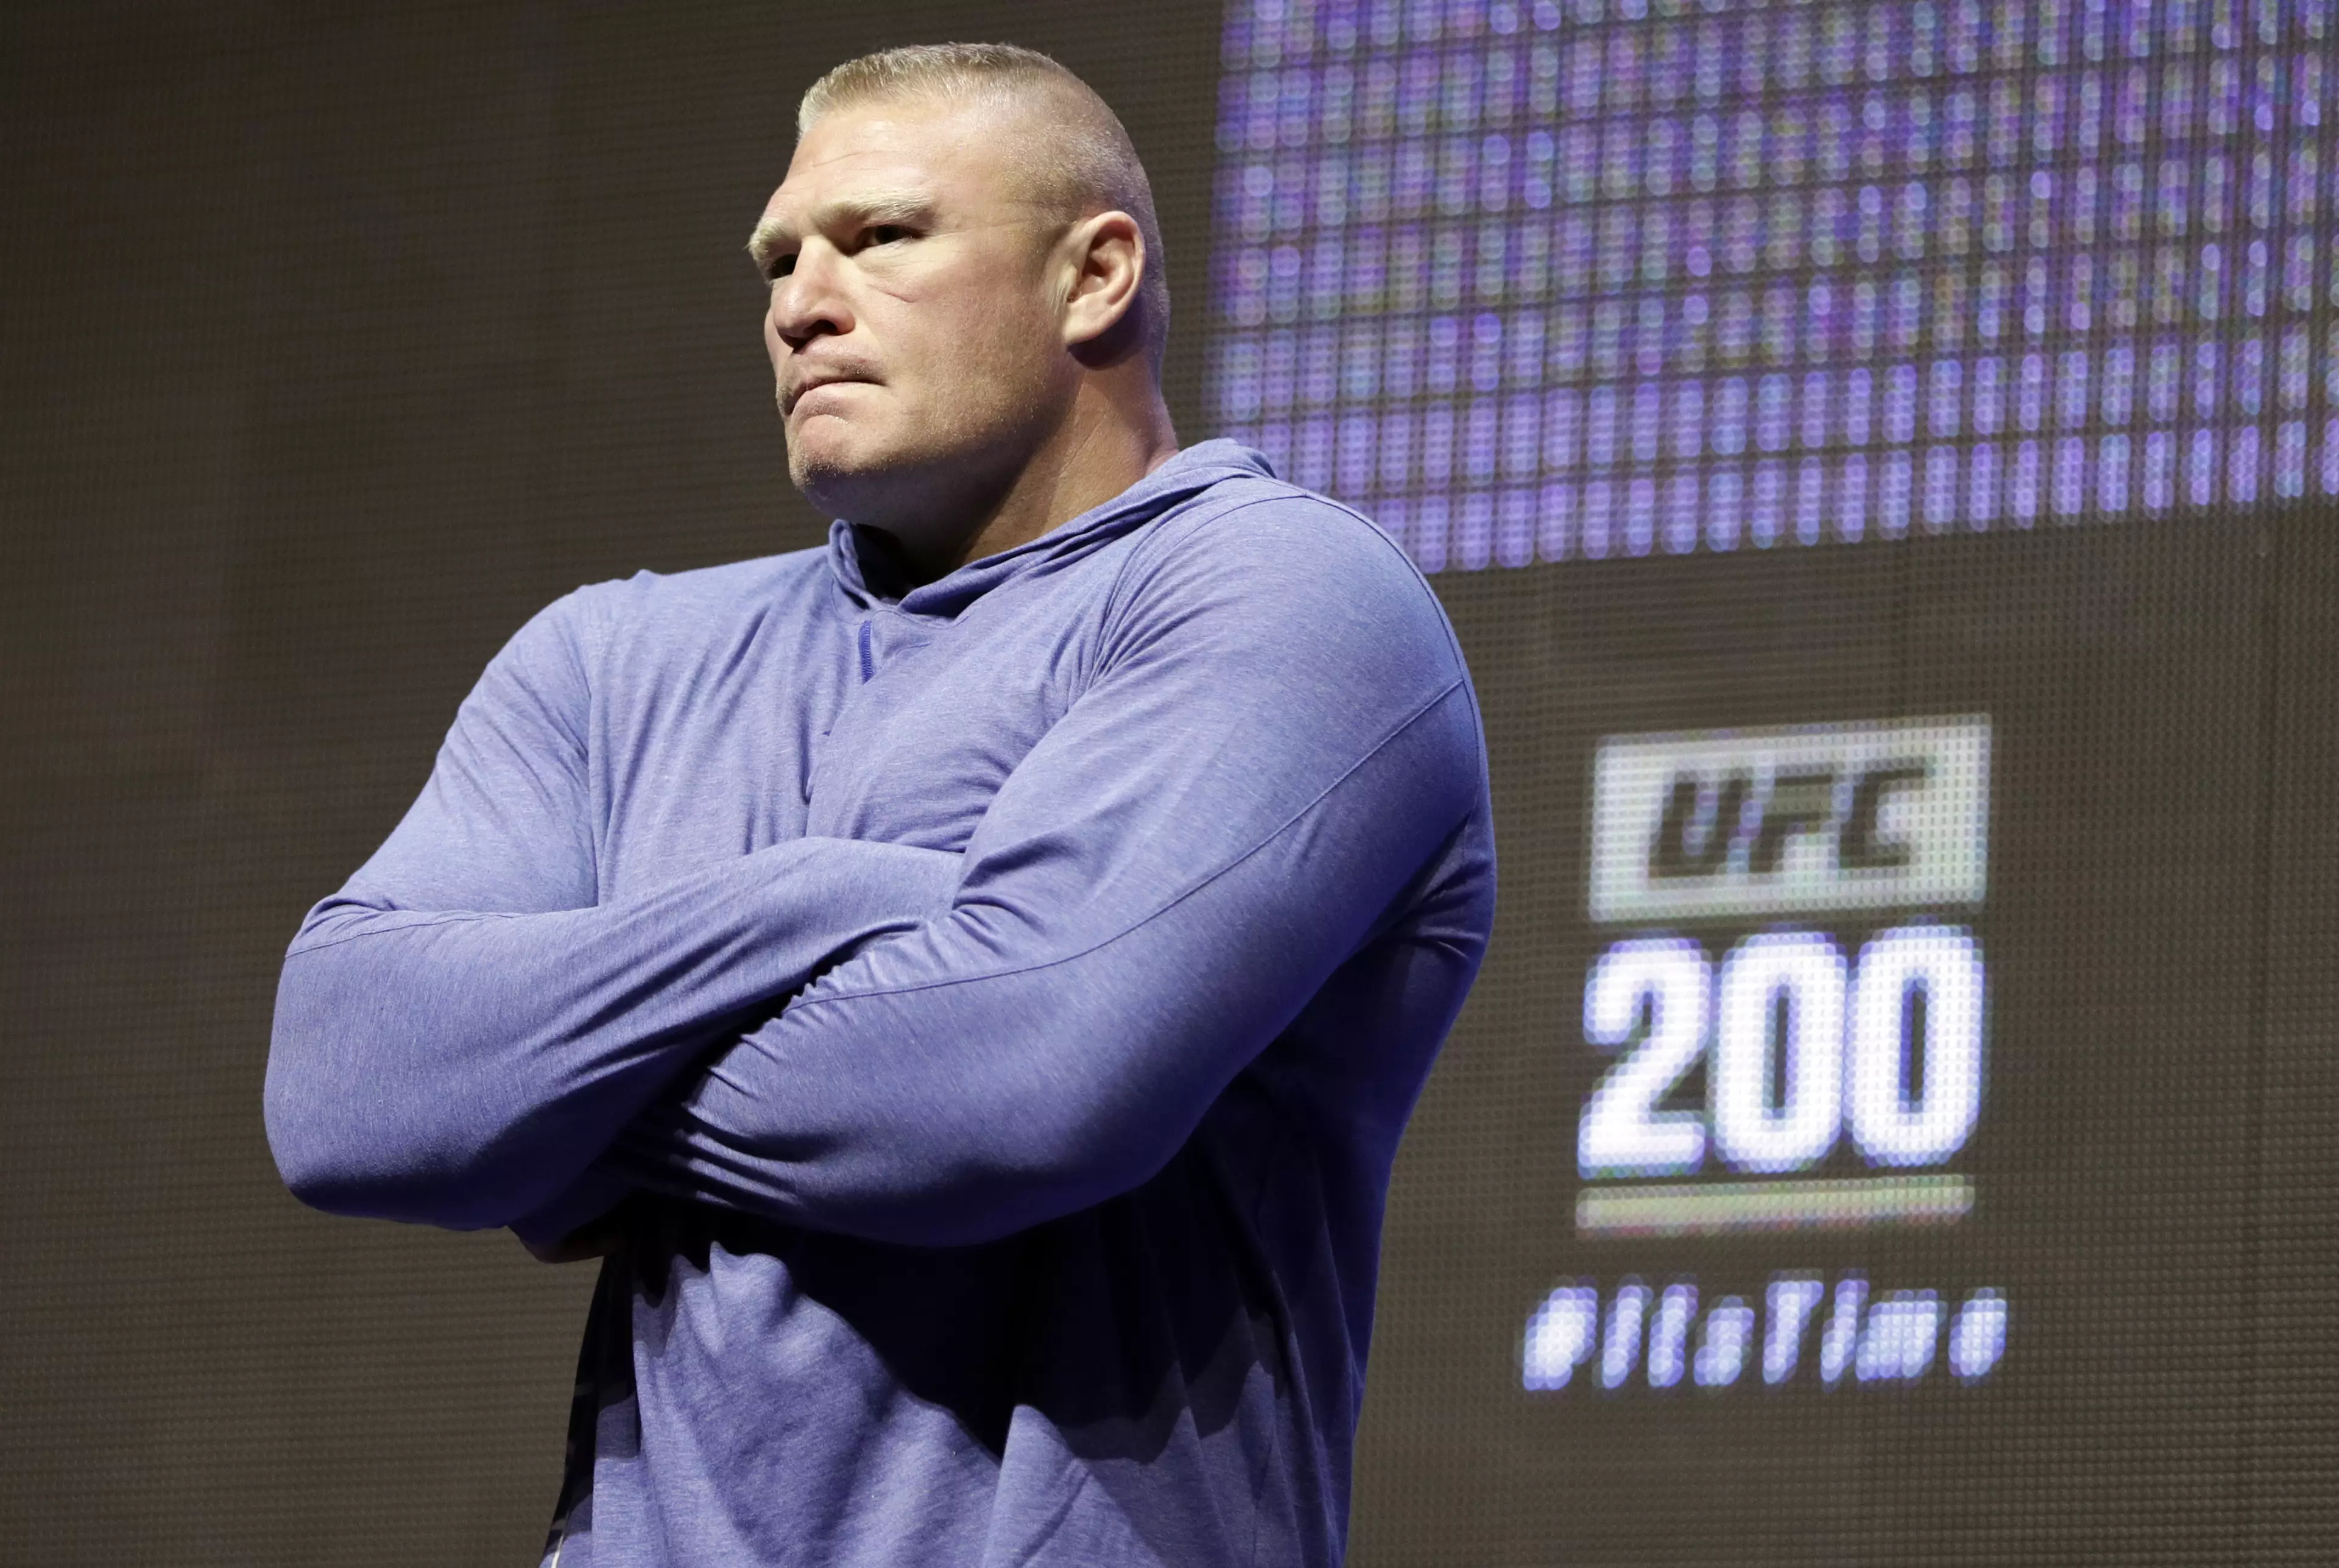 A Date Has Been Set For Brock Lesnar's Failed Drugs Test Judgement